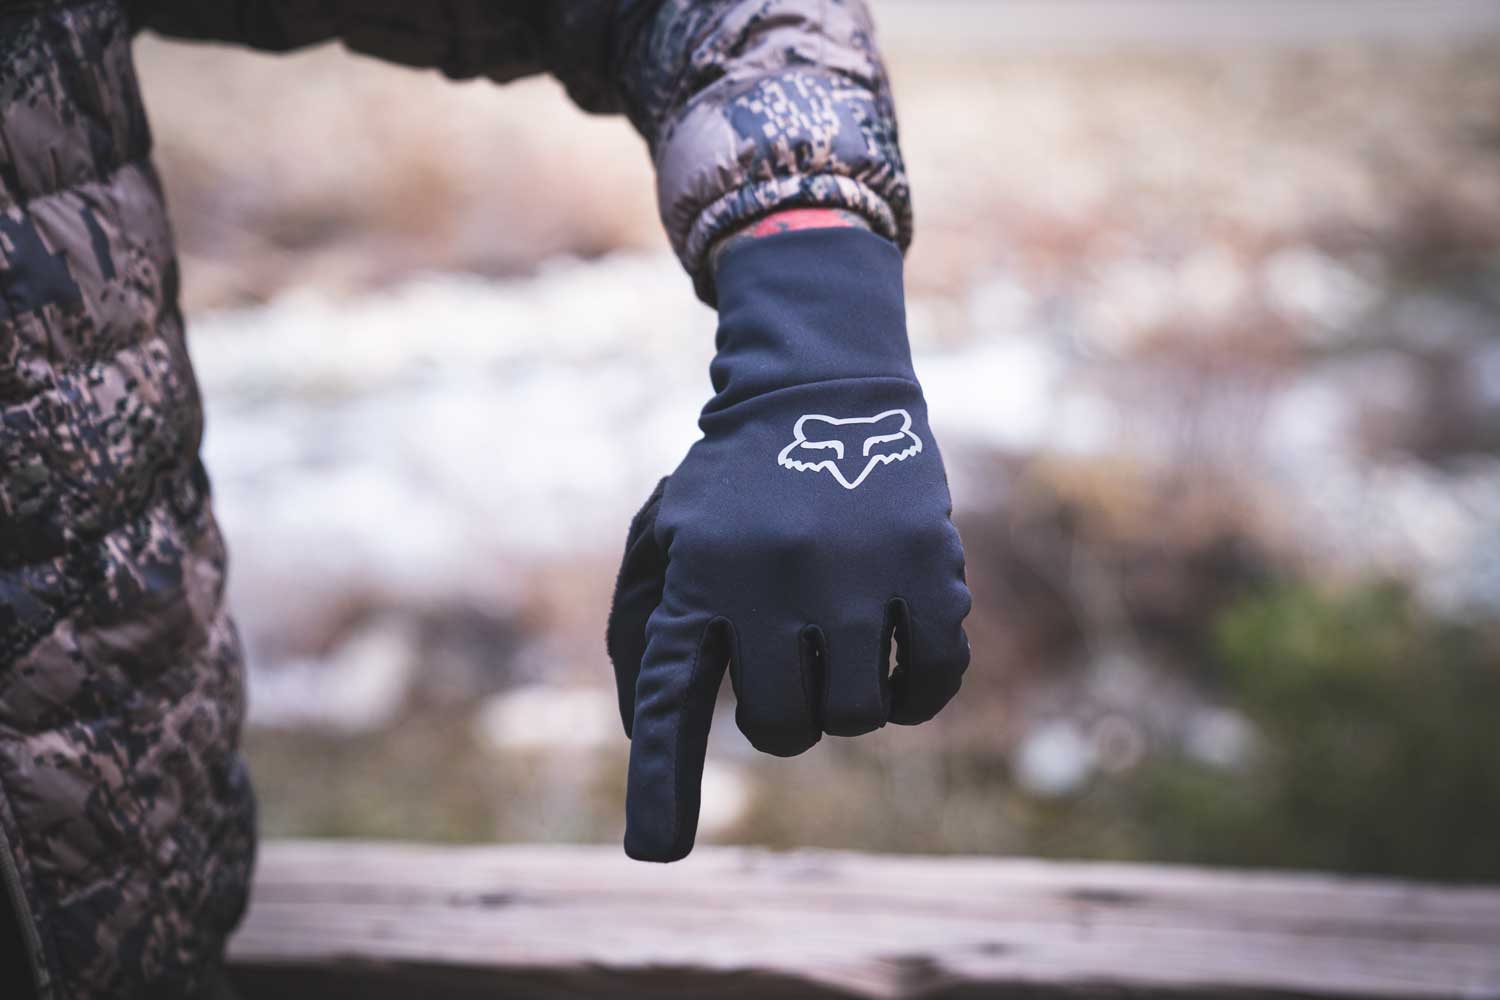 Fox Defend Fire Protective Gloves Black 